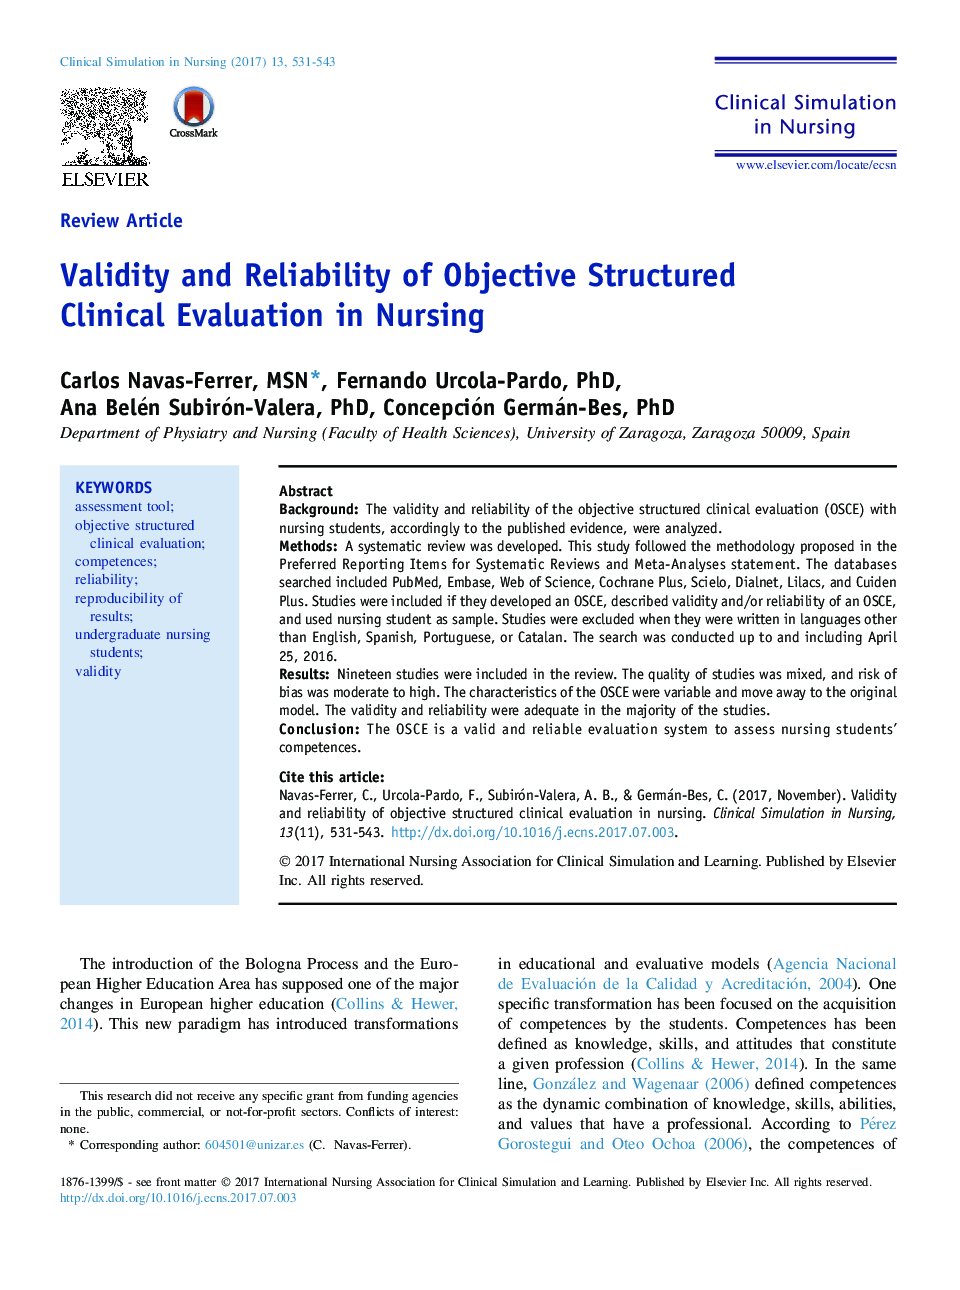 Validity and Reliability of Objective Structured Clinical Evaluation in Nursing